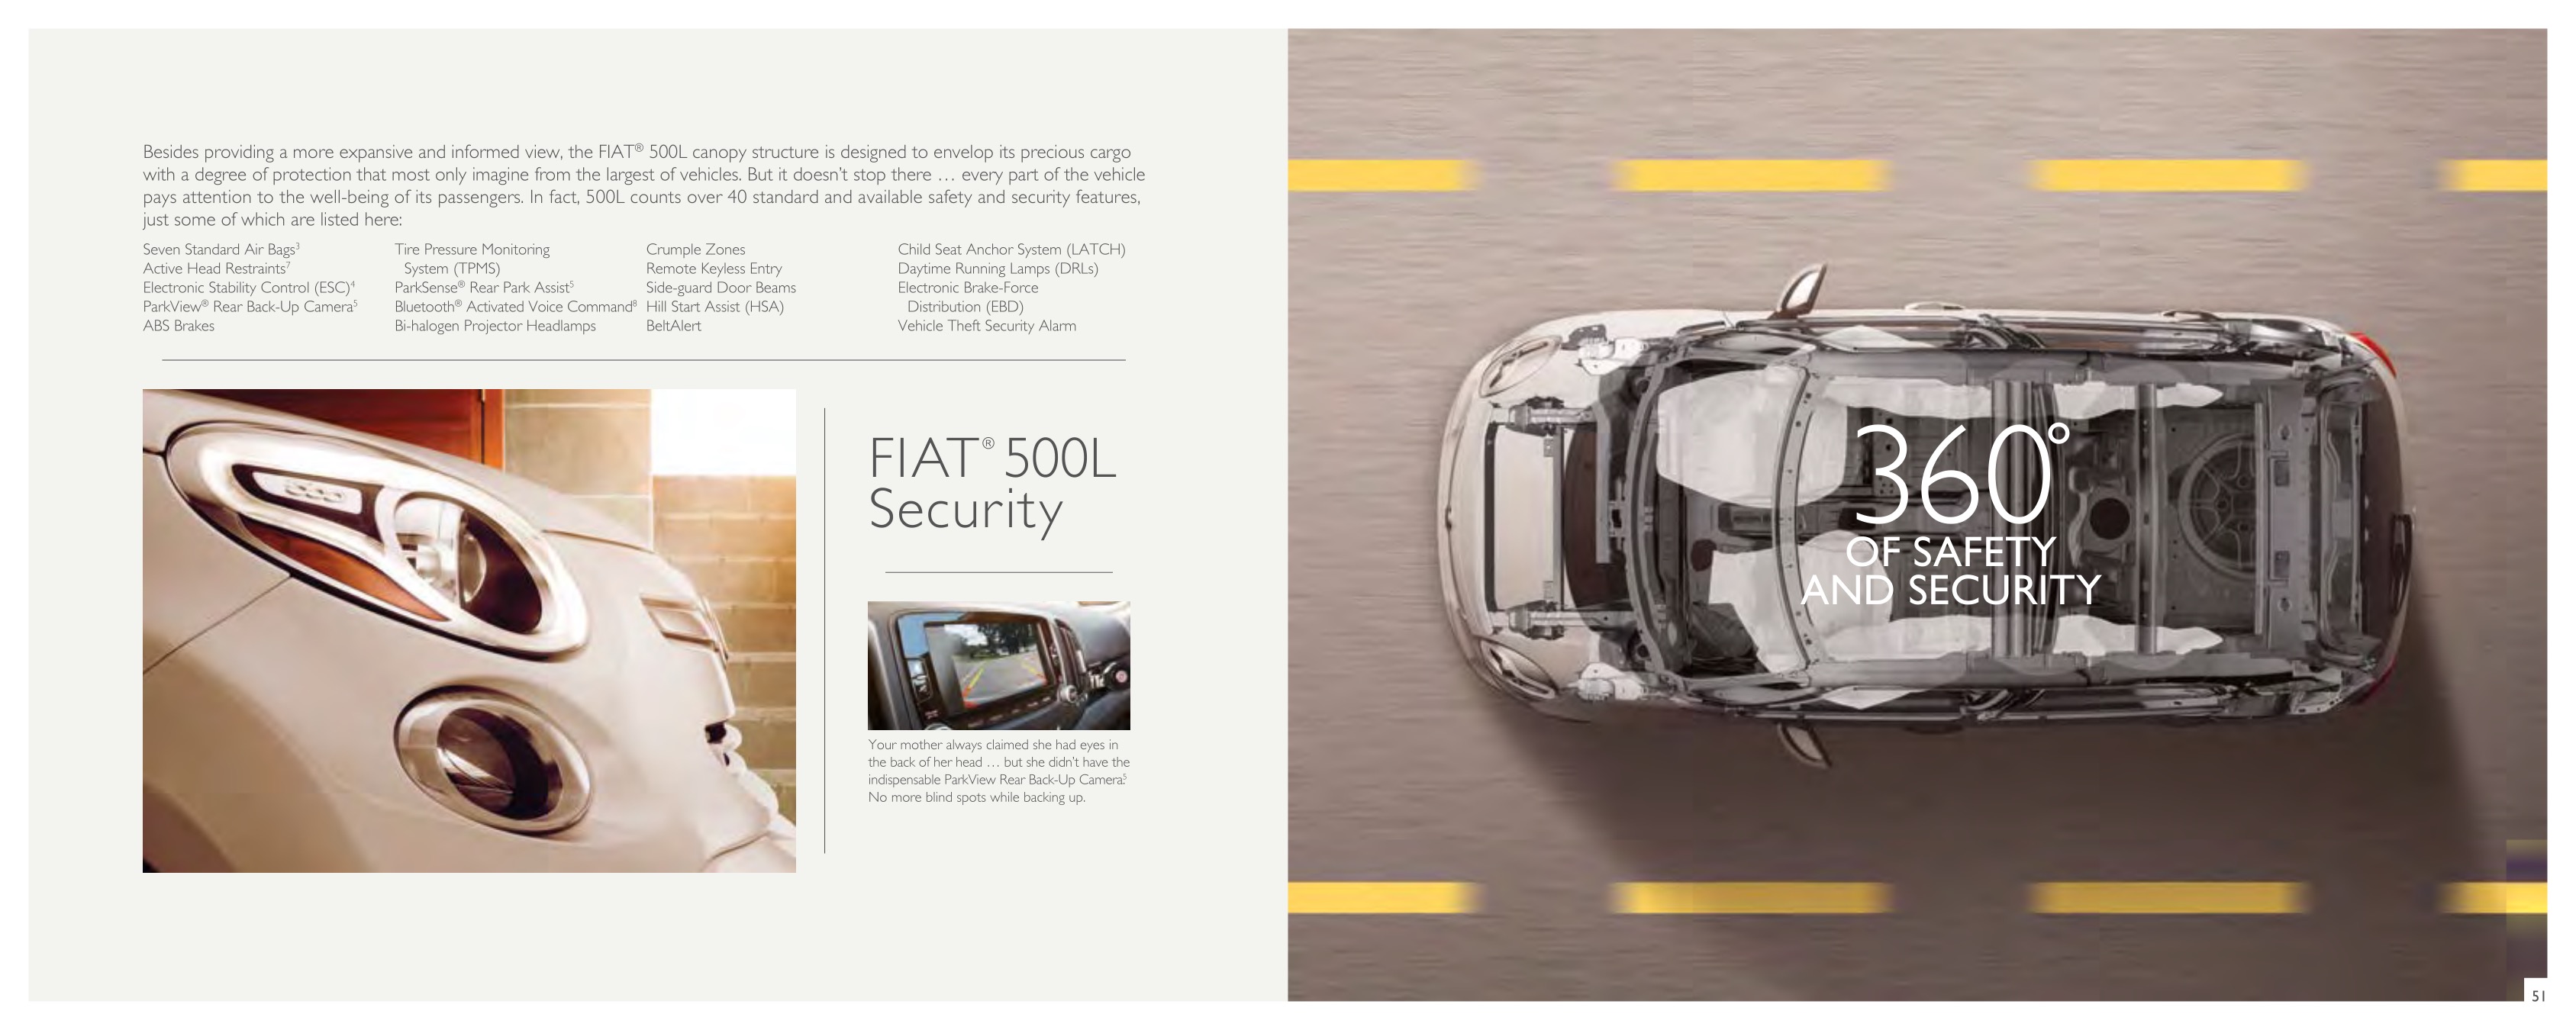 2015 Fiat 500 Brochure Page 25